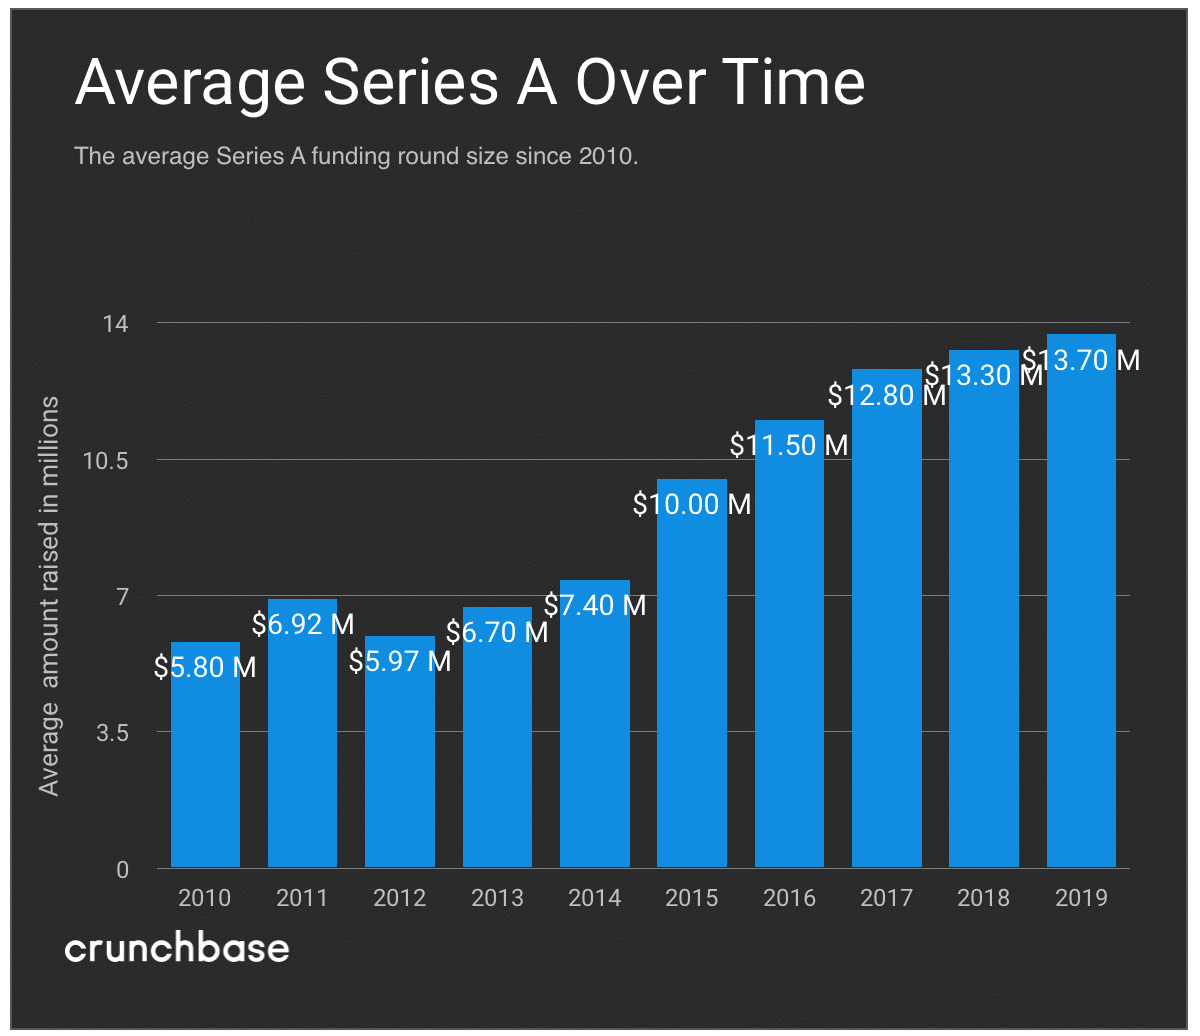 Average Series A Funding Amount Over Time